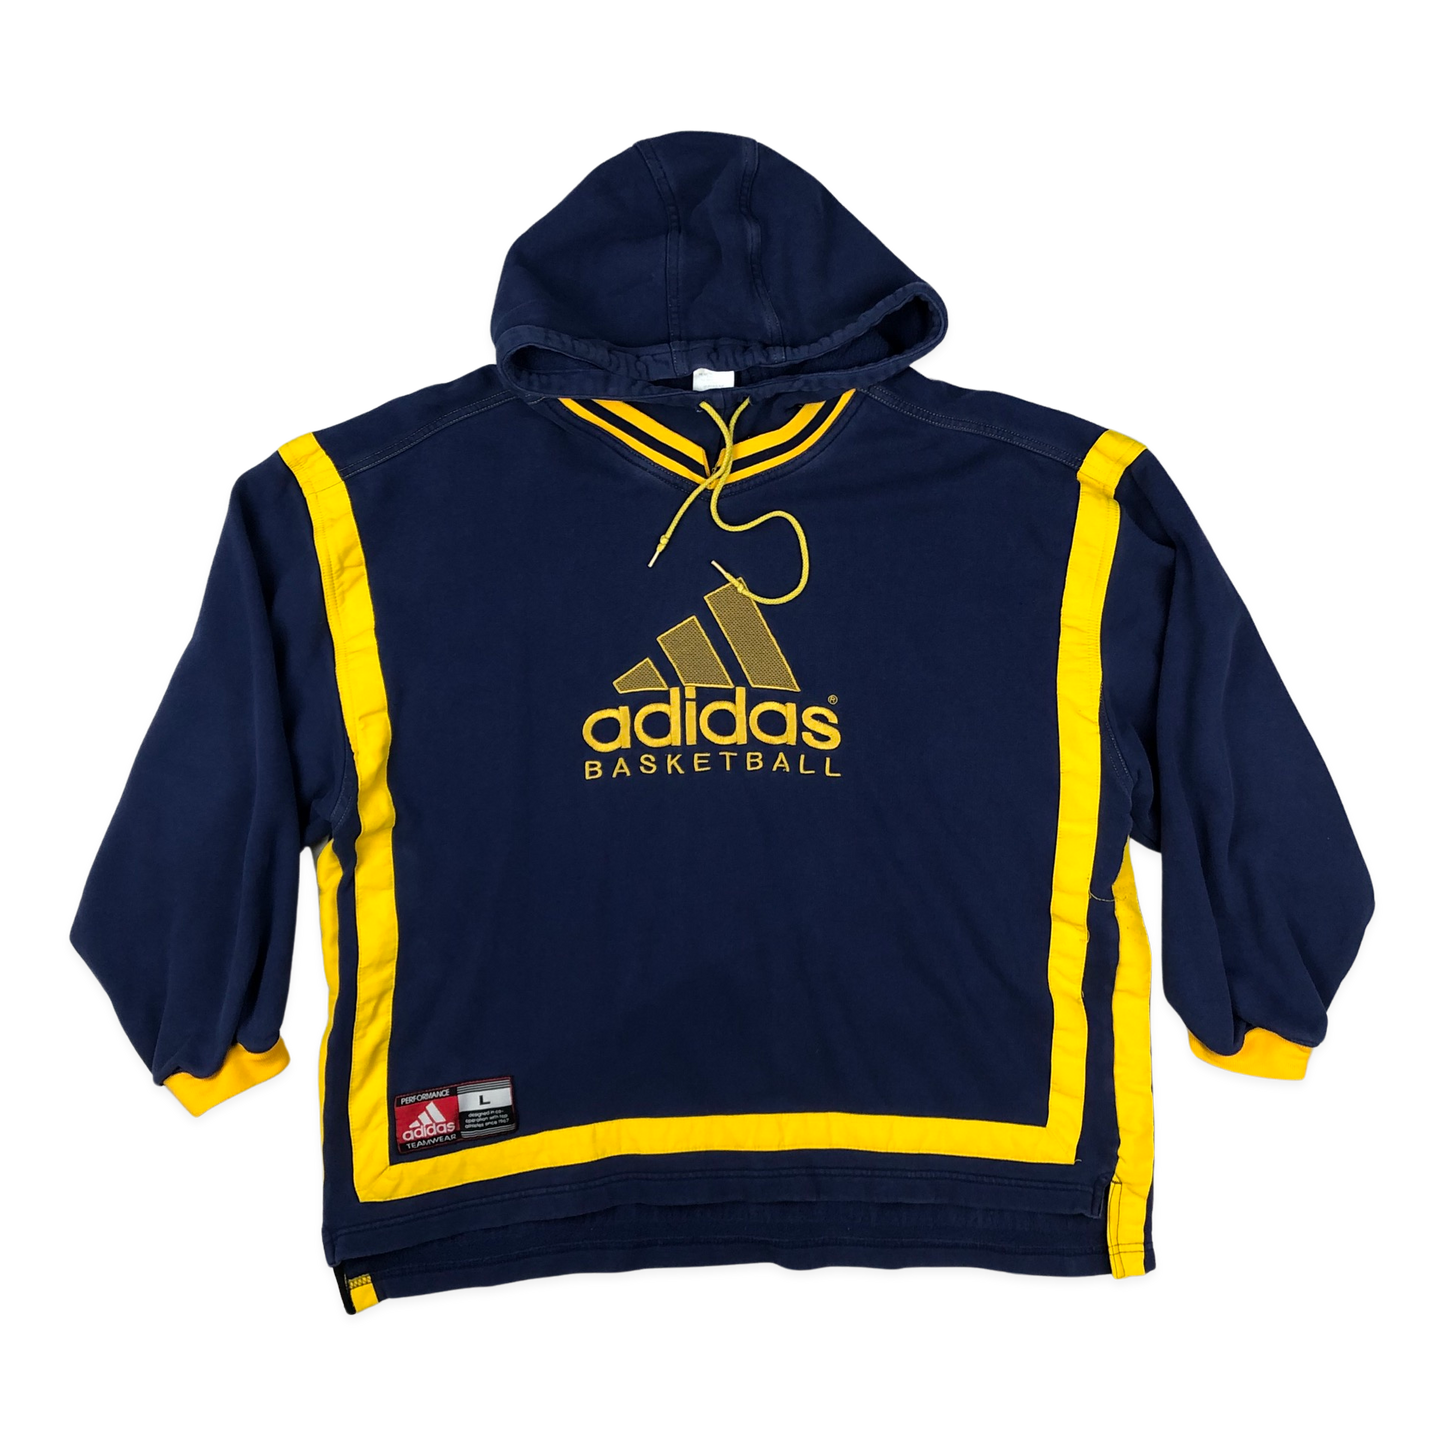 Vintage Adidas Basketball Blue and Yellow Hoodie Large-4XL